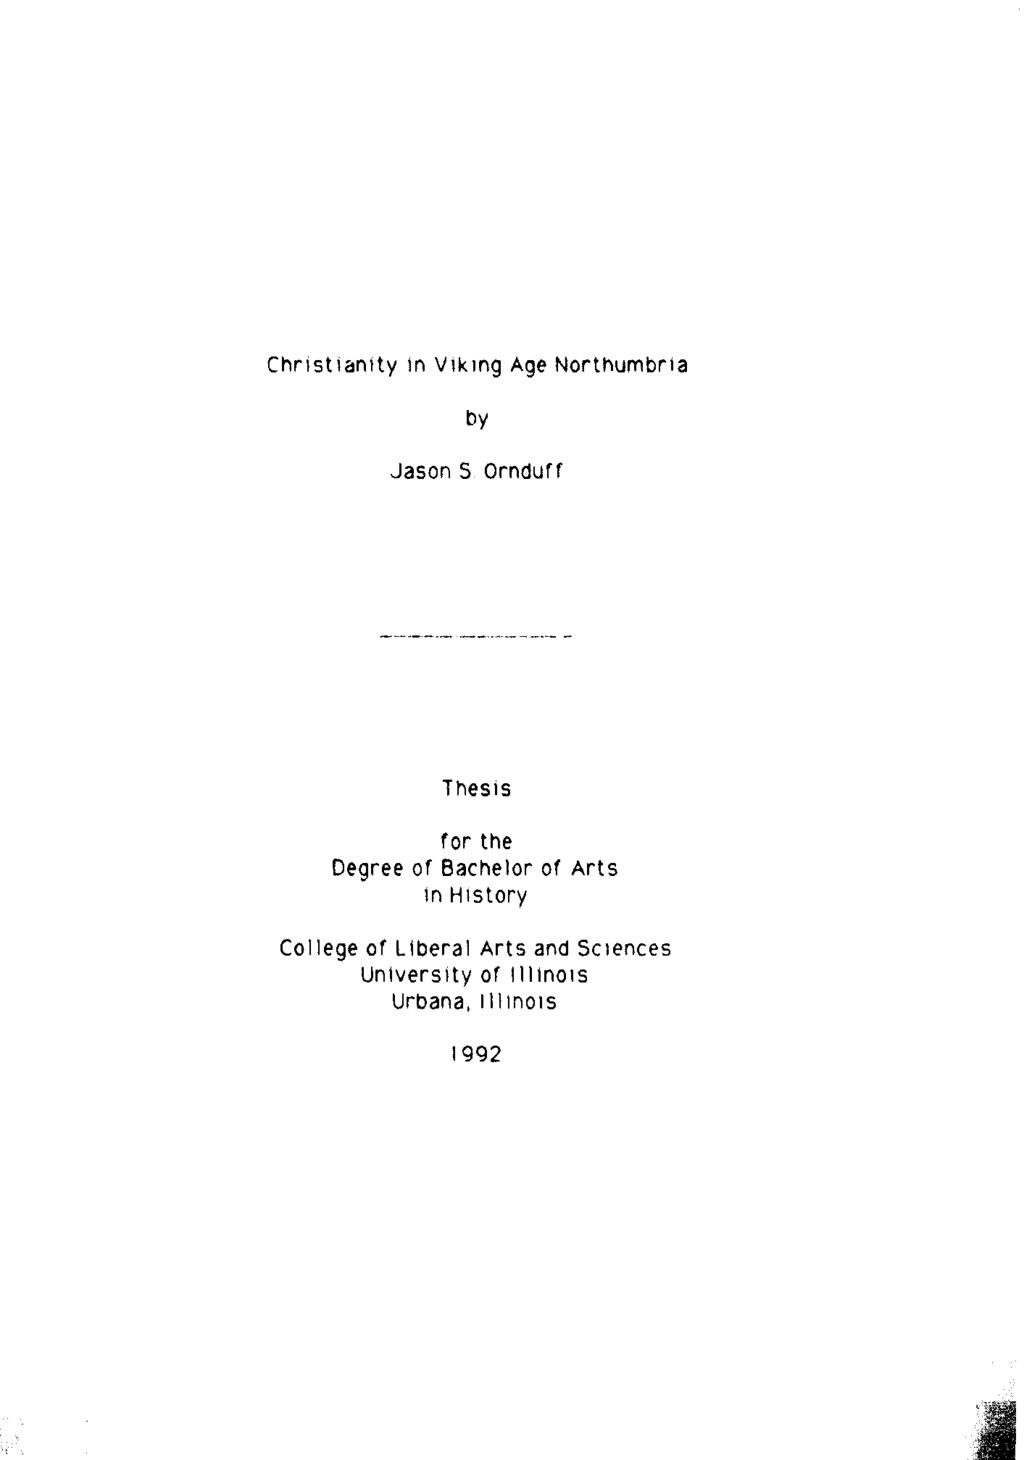 Christianity in Viking Age Northumbria by Jason S Ornduff Thesis for the Degree of Bachelor of